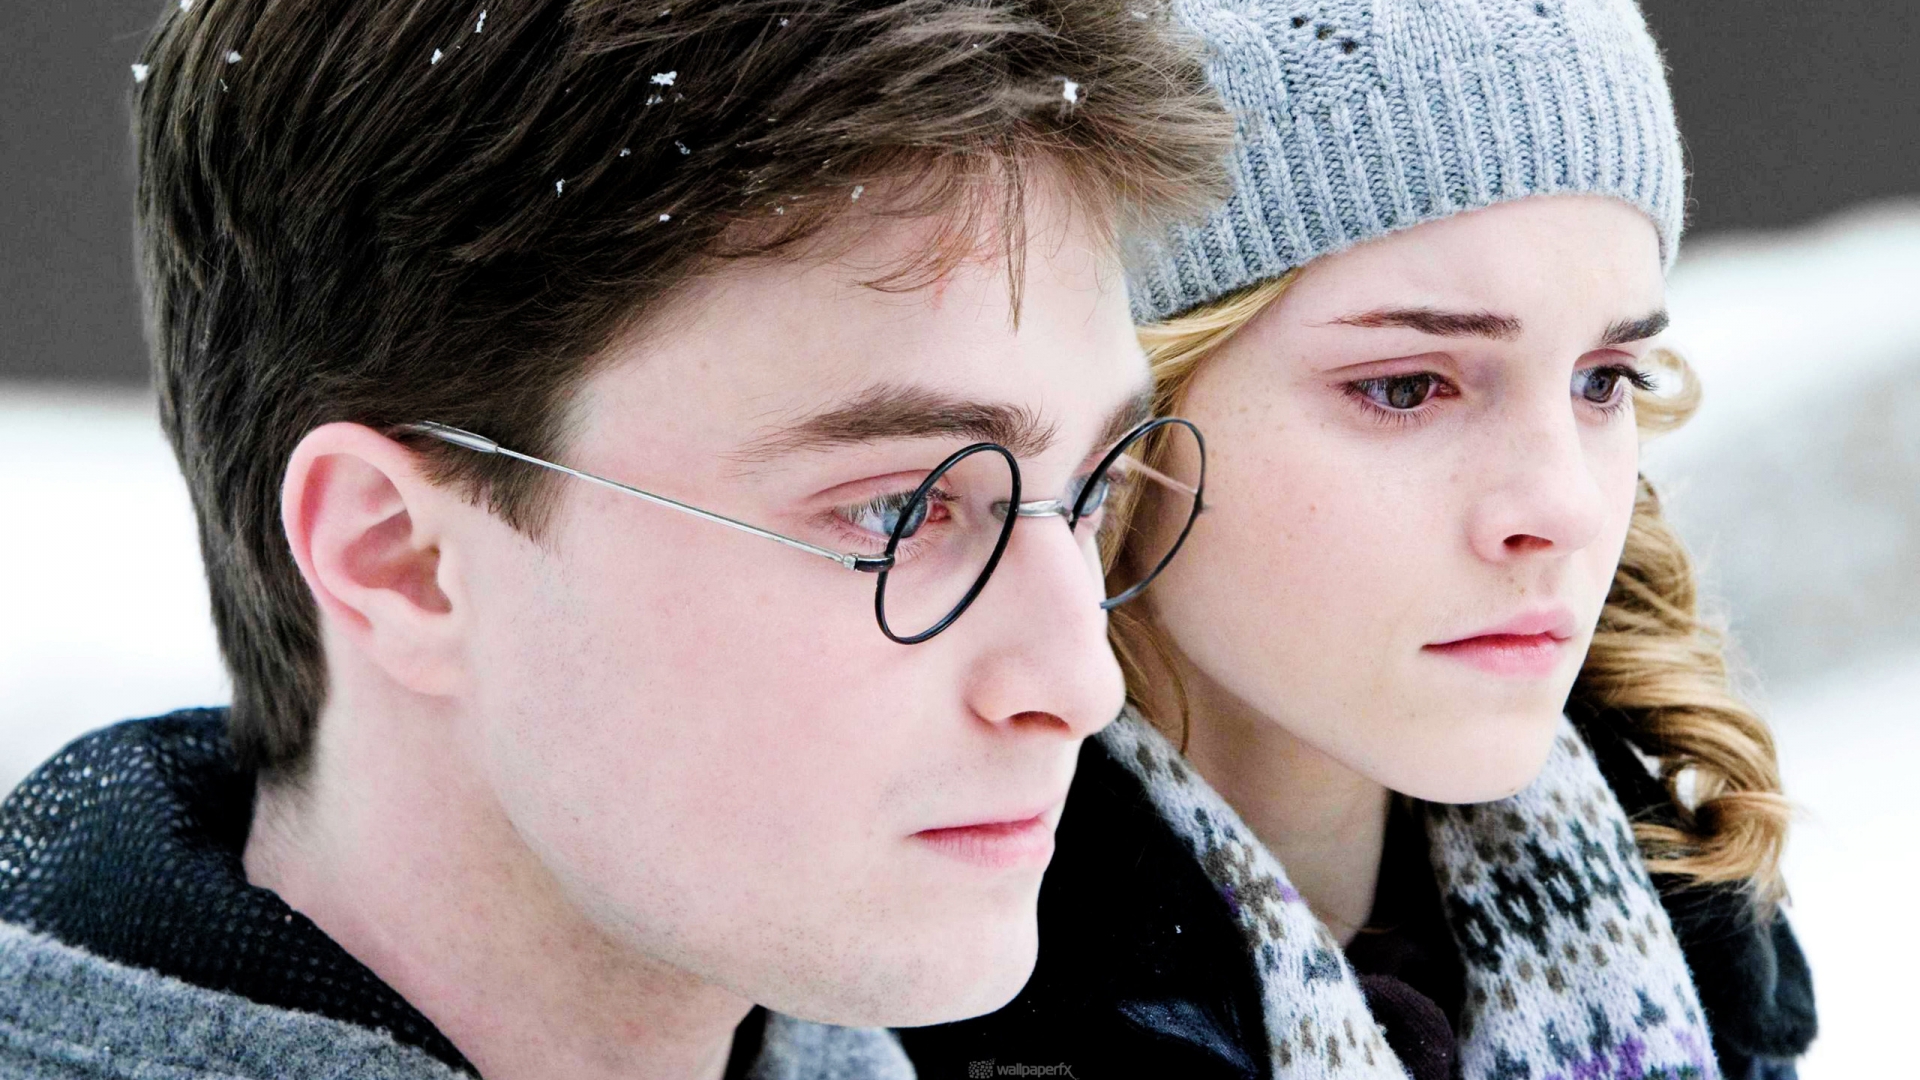 Harry and Hermione for 1920 x 1080 HDTV 1080p resolution